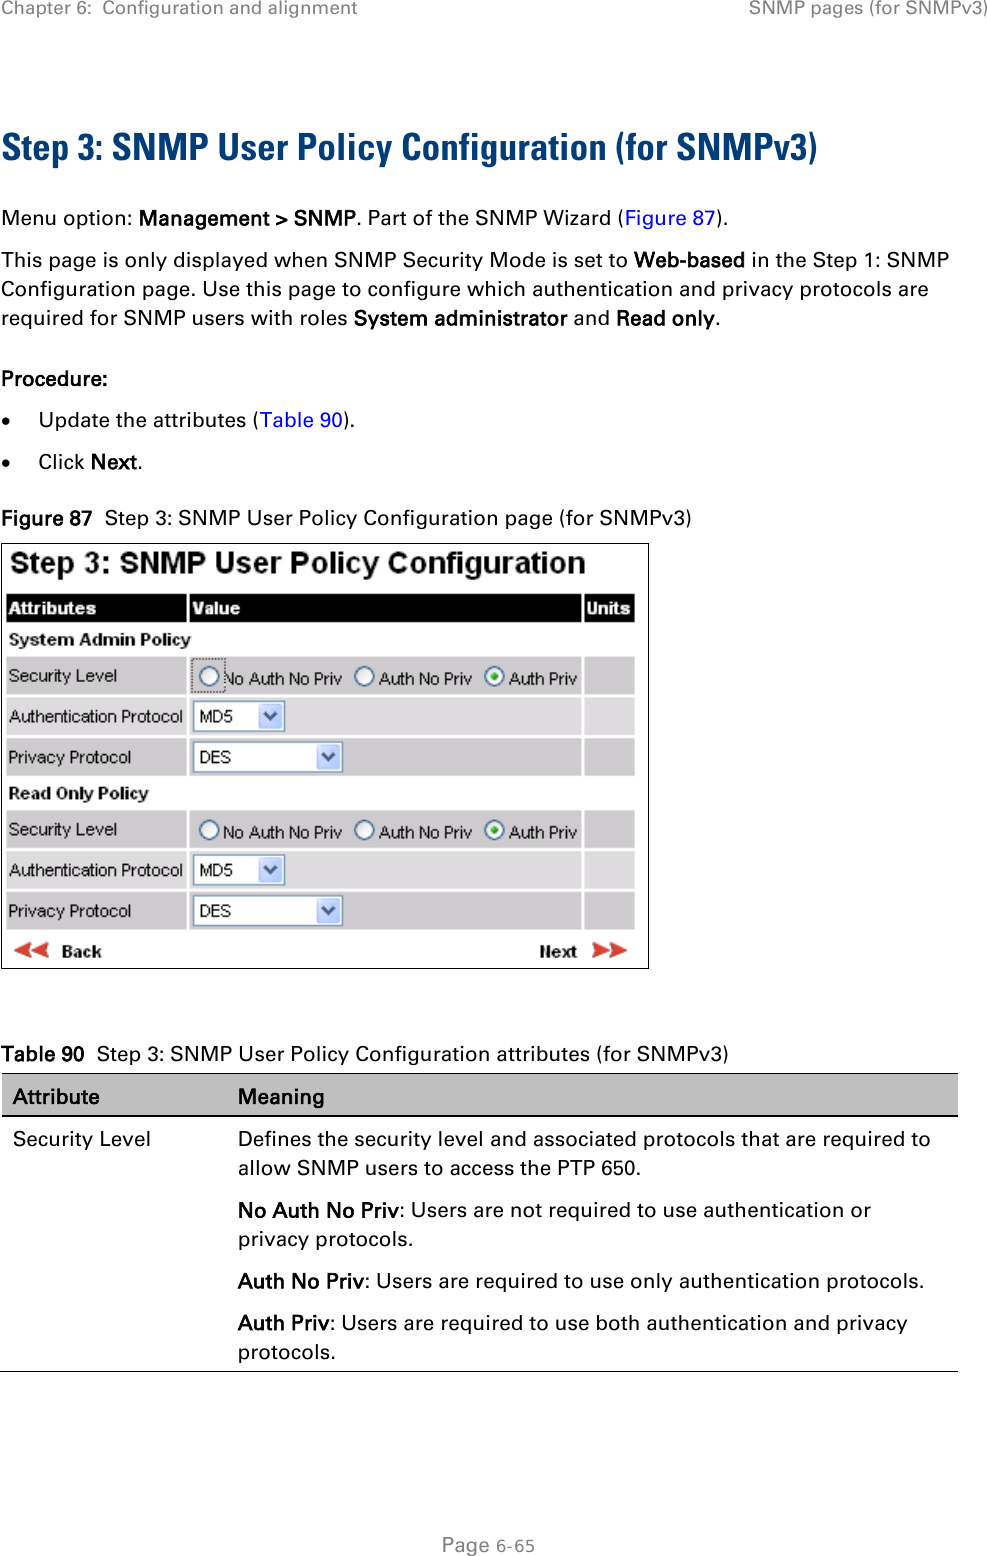 Chapter 6:  Configuration and alignment SNMP pages (for SNMPv3)  Step 3: SNMP User Policy Configuration (for SNMPv3) Menu option: Management &gt; SNMP. Part of the SNMP Wizard (Figure 87). This page is only displayed when SNMP Security Mode is set to Web-based in the Step 1: SNMP Configuration page. Use this page to configure which authentication and privacy protocols are required for SNMP users with roles System administrator and Read only. Procedure: • Update the attributes (Table 90). • Click Next. Figure 87  Step 3: SNMP User Policy Configuration page (for SNMPv3)   Table 90  Step 3: SNMP User Policy Configuration attributes (for SNMPv3) Attribute Meaning Security Level Defines the security level and associated protocols that are required to allow SNMP users to access the PTP 650. No Auth No Priv: Users are not required to use authentication or privacy protocols. Auth No Priv: Users are required to use only authentication protocols. Auth Priv: Users are required to use both authentication and privacy protocols.  Page 6-65 